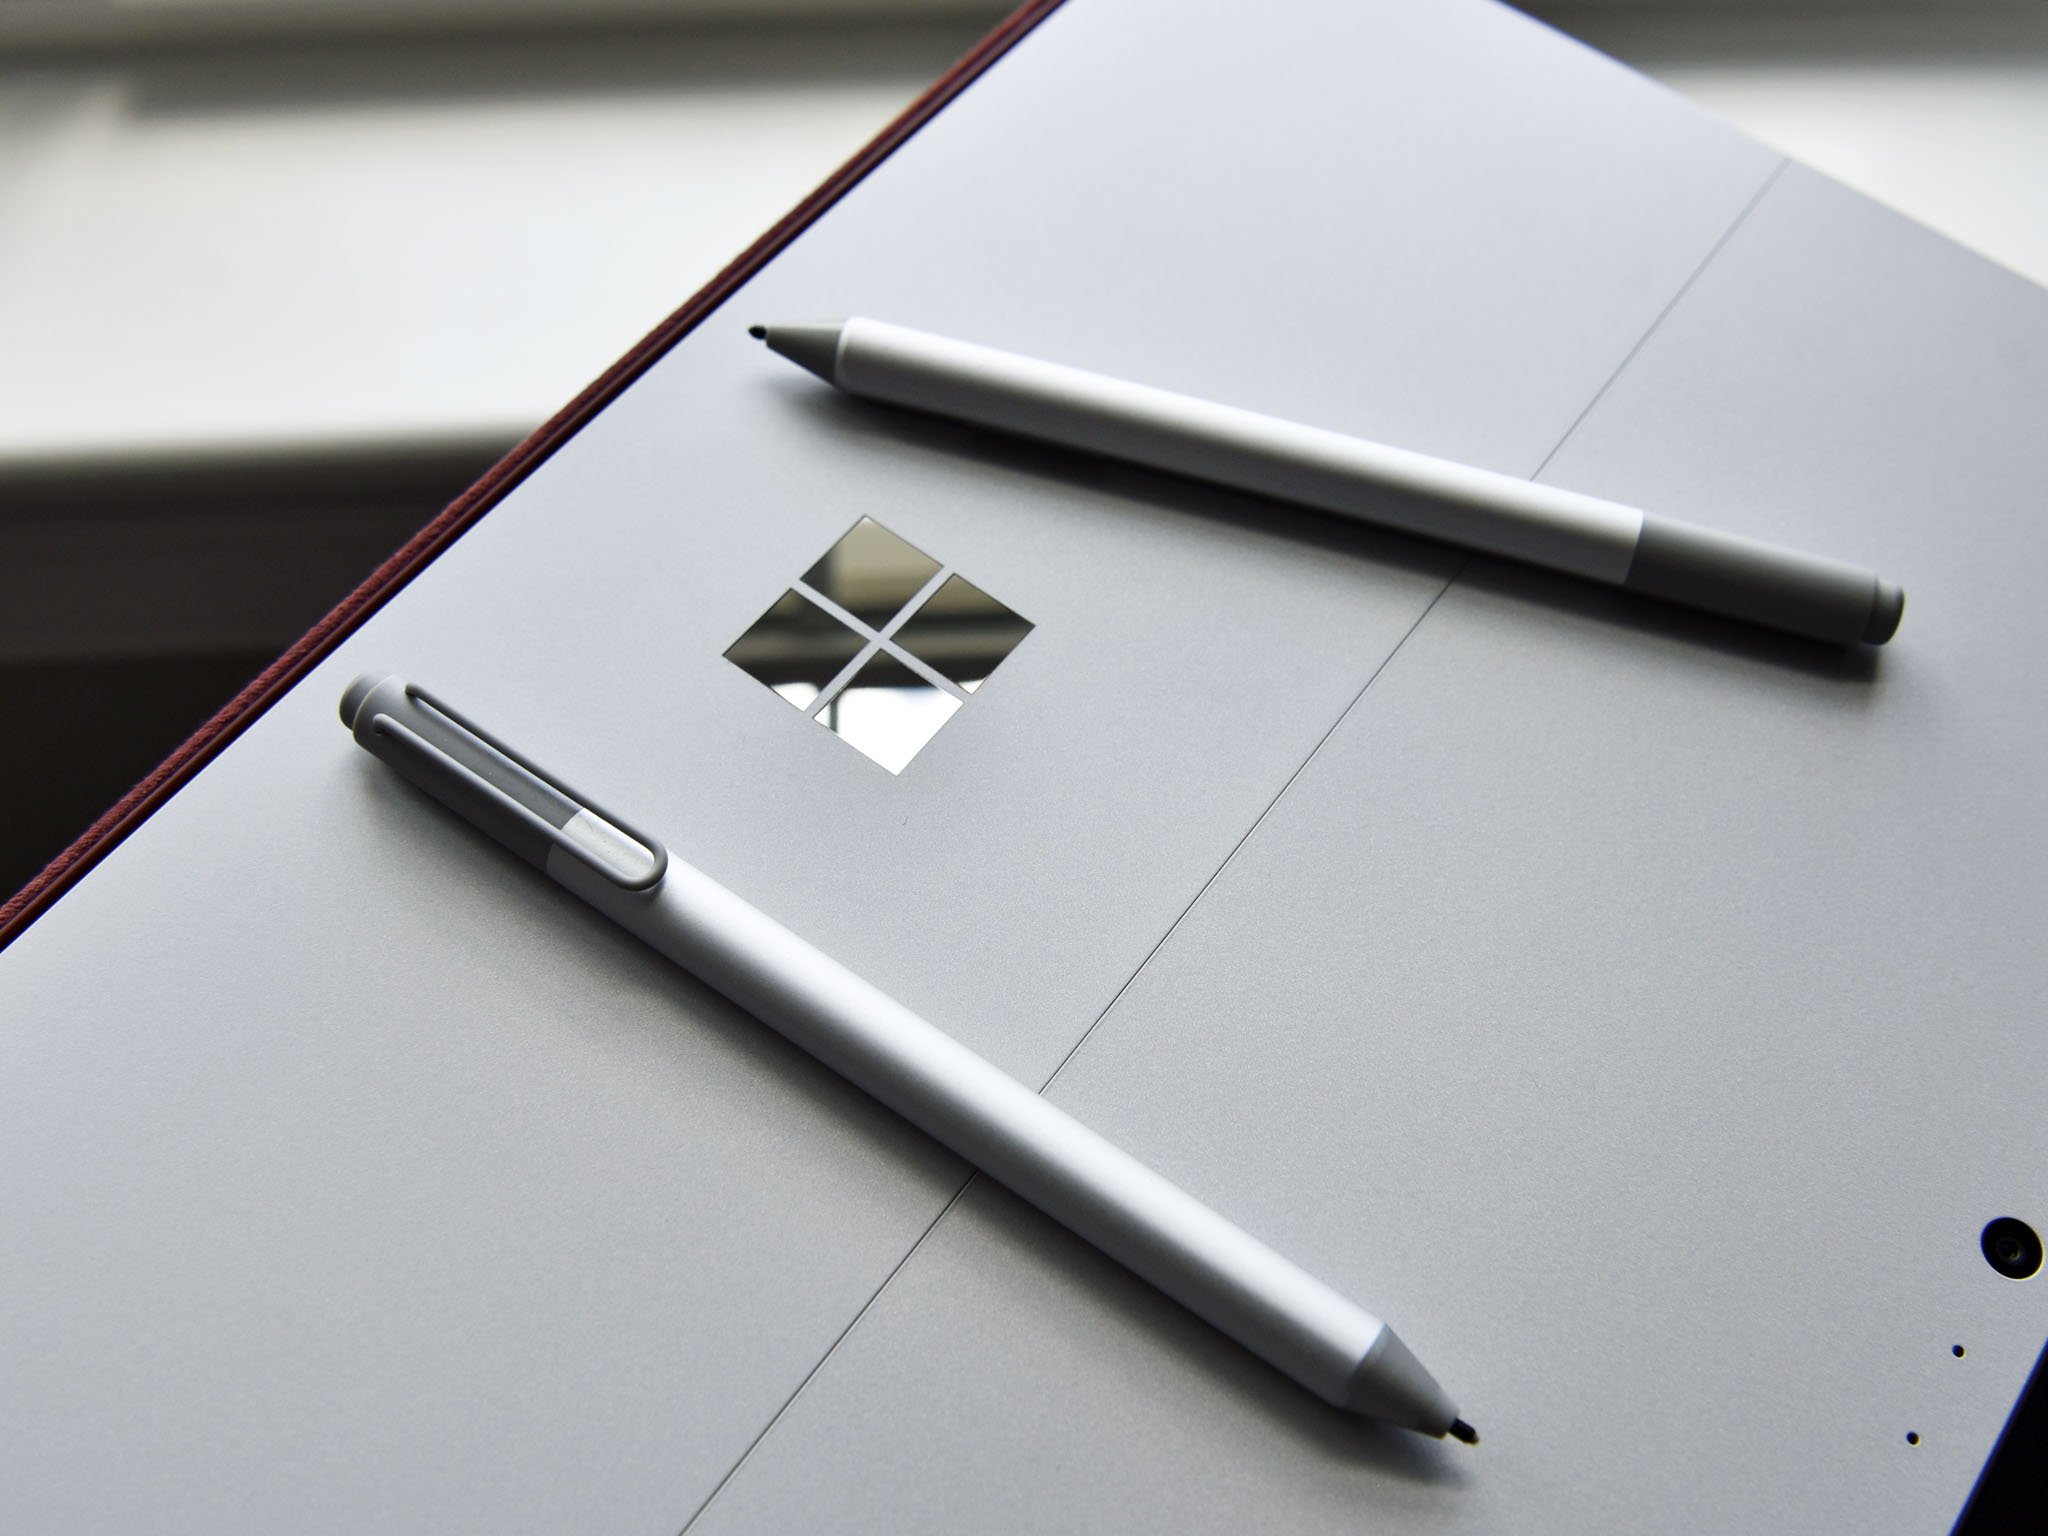 microsofts-surface-pro-3-pen-is-the-best-tablet-stylus